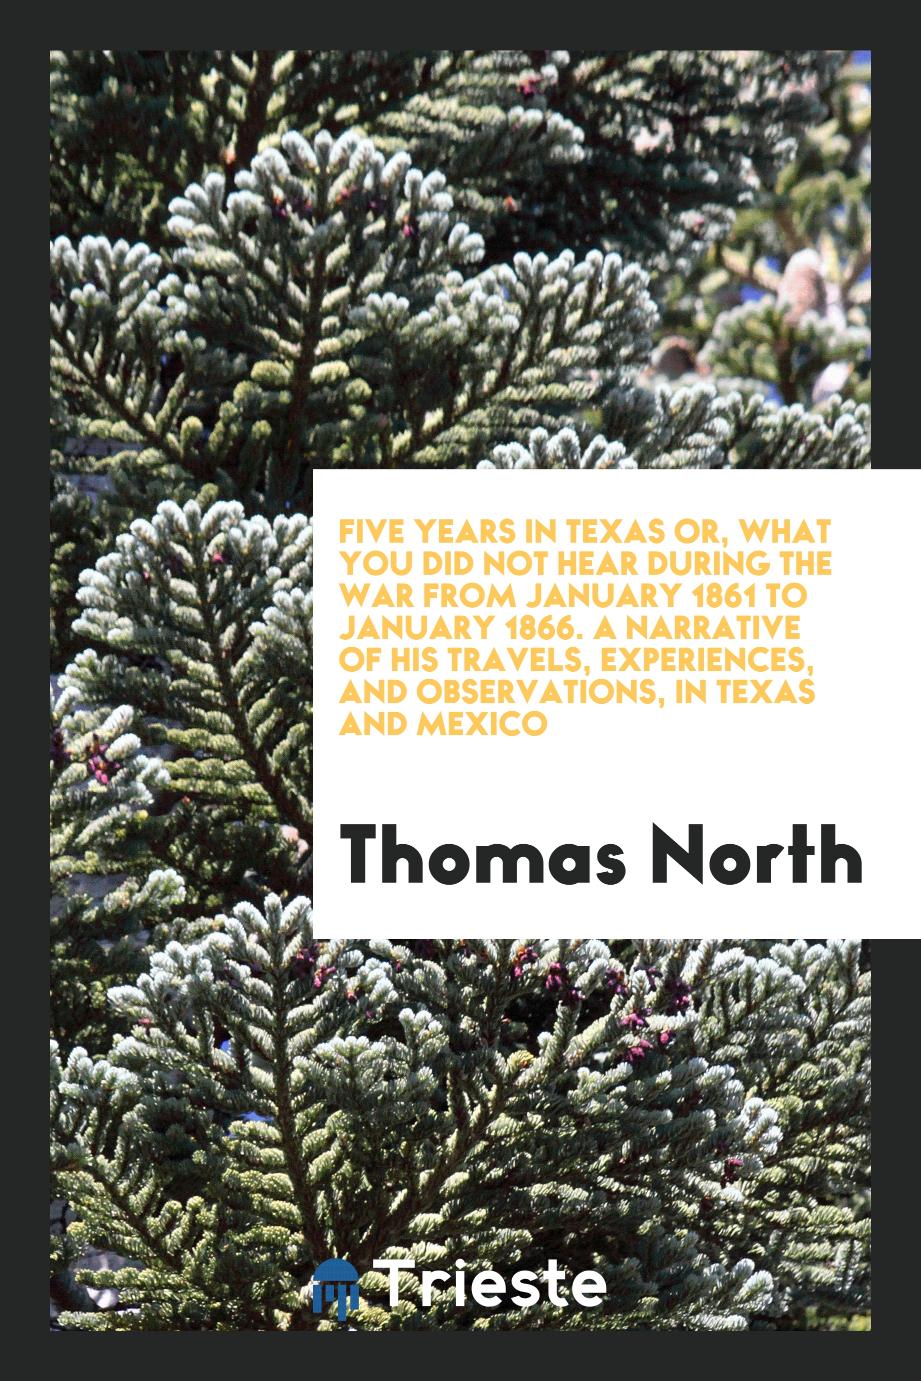 Five years in Texas or, What you did not hear during the war from January 1861 to January 1866. A narrative of his travels, experiences, and observations, in Texas and Mexico